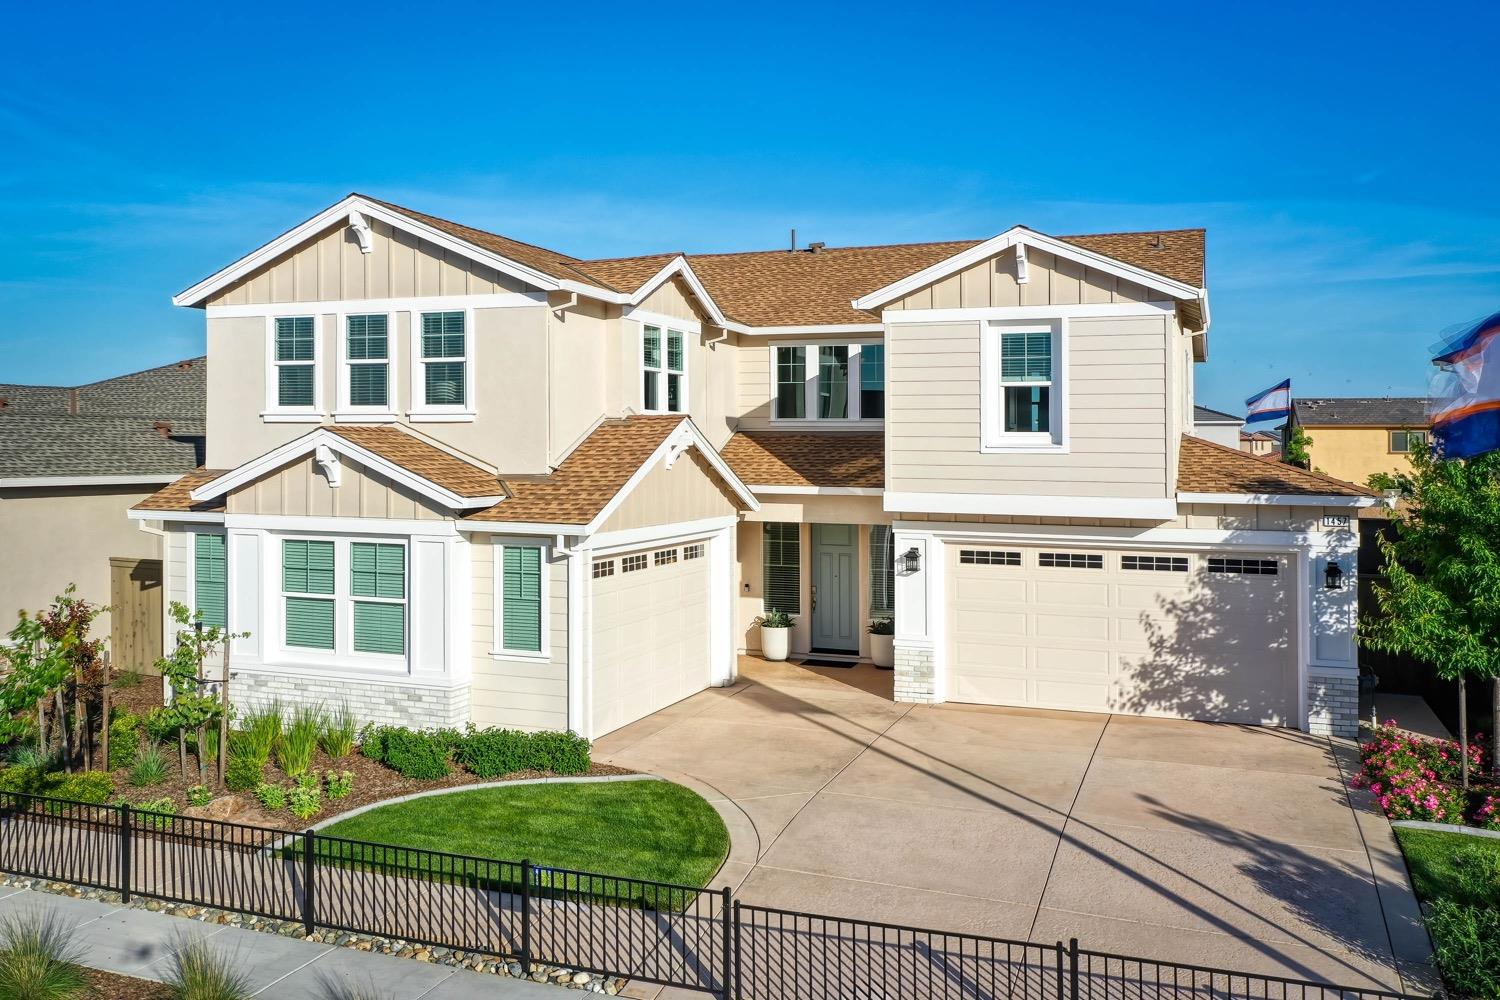 Photo of 1457 Wadsworth Cir in Roseville, CA